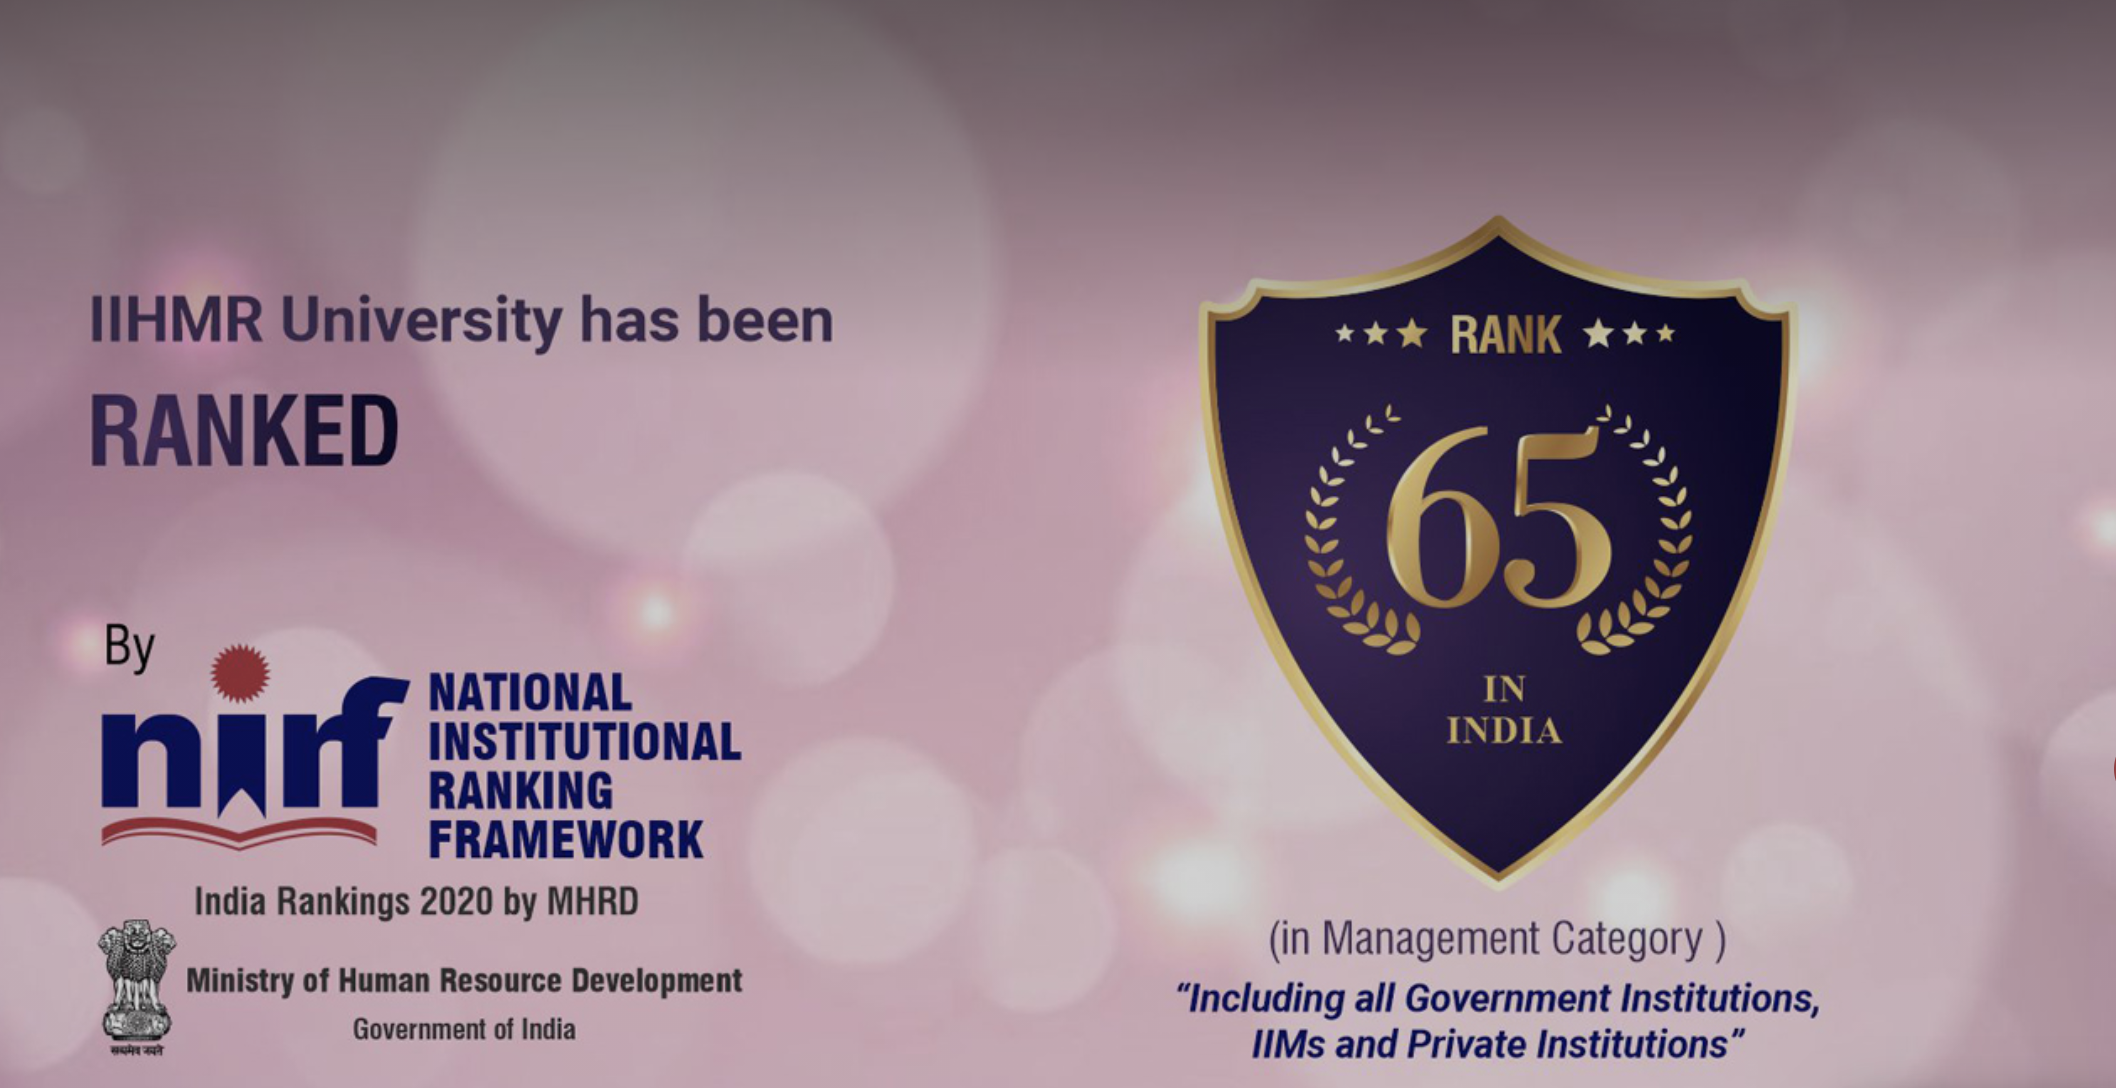 IIHMR University ranked 65th in Management Category by the National Institutional Ranking Framework (NIRF)